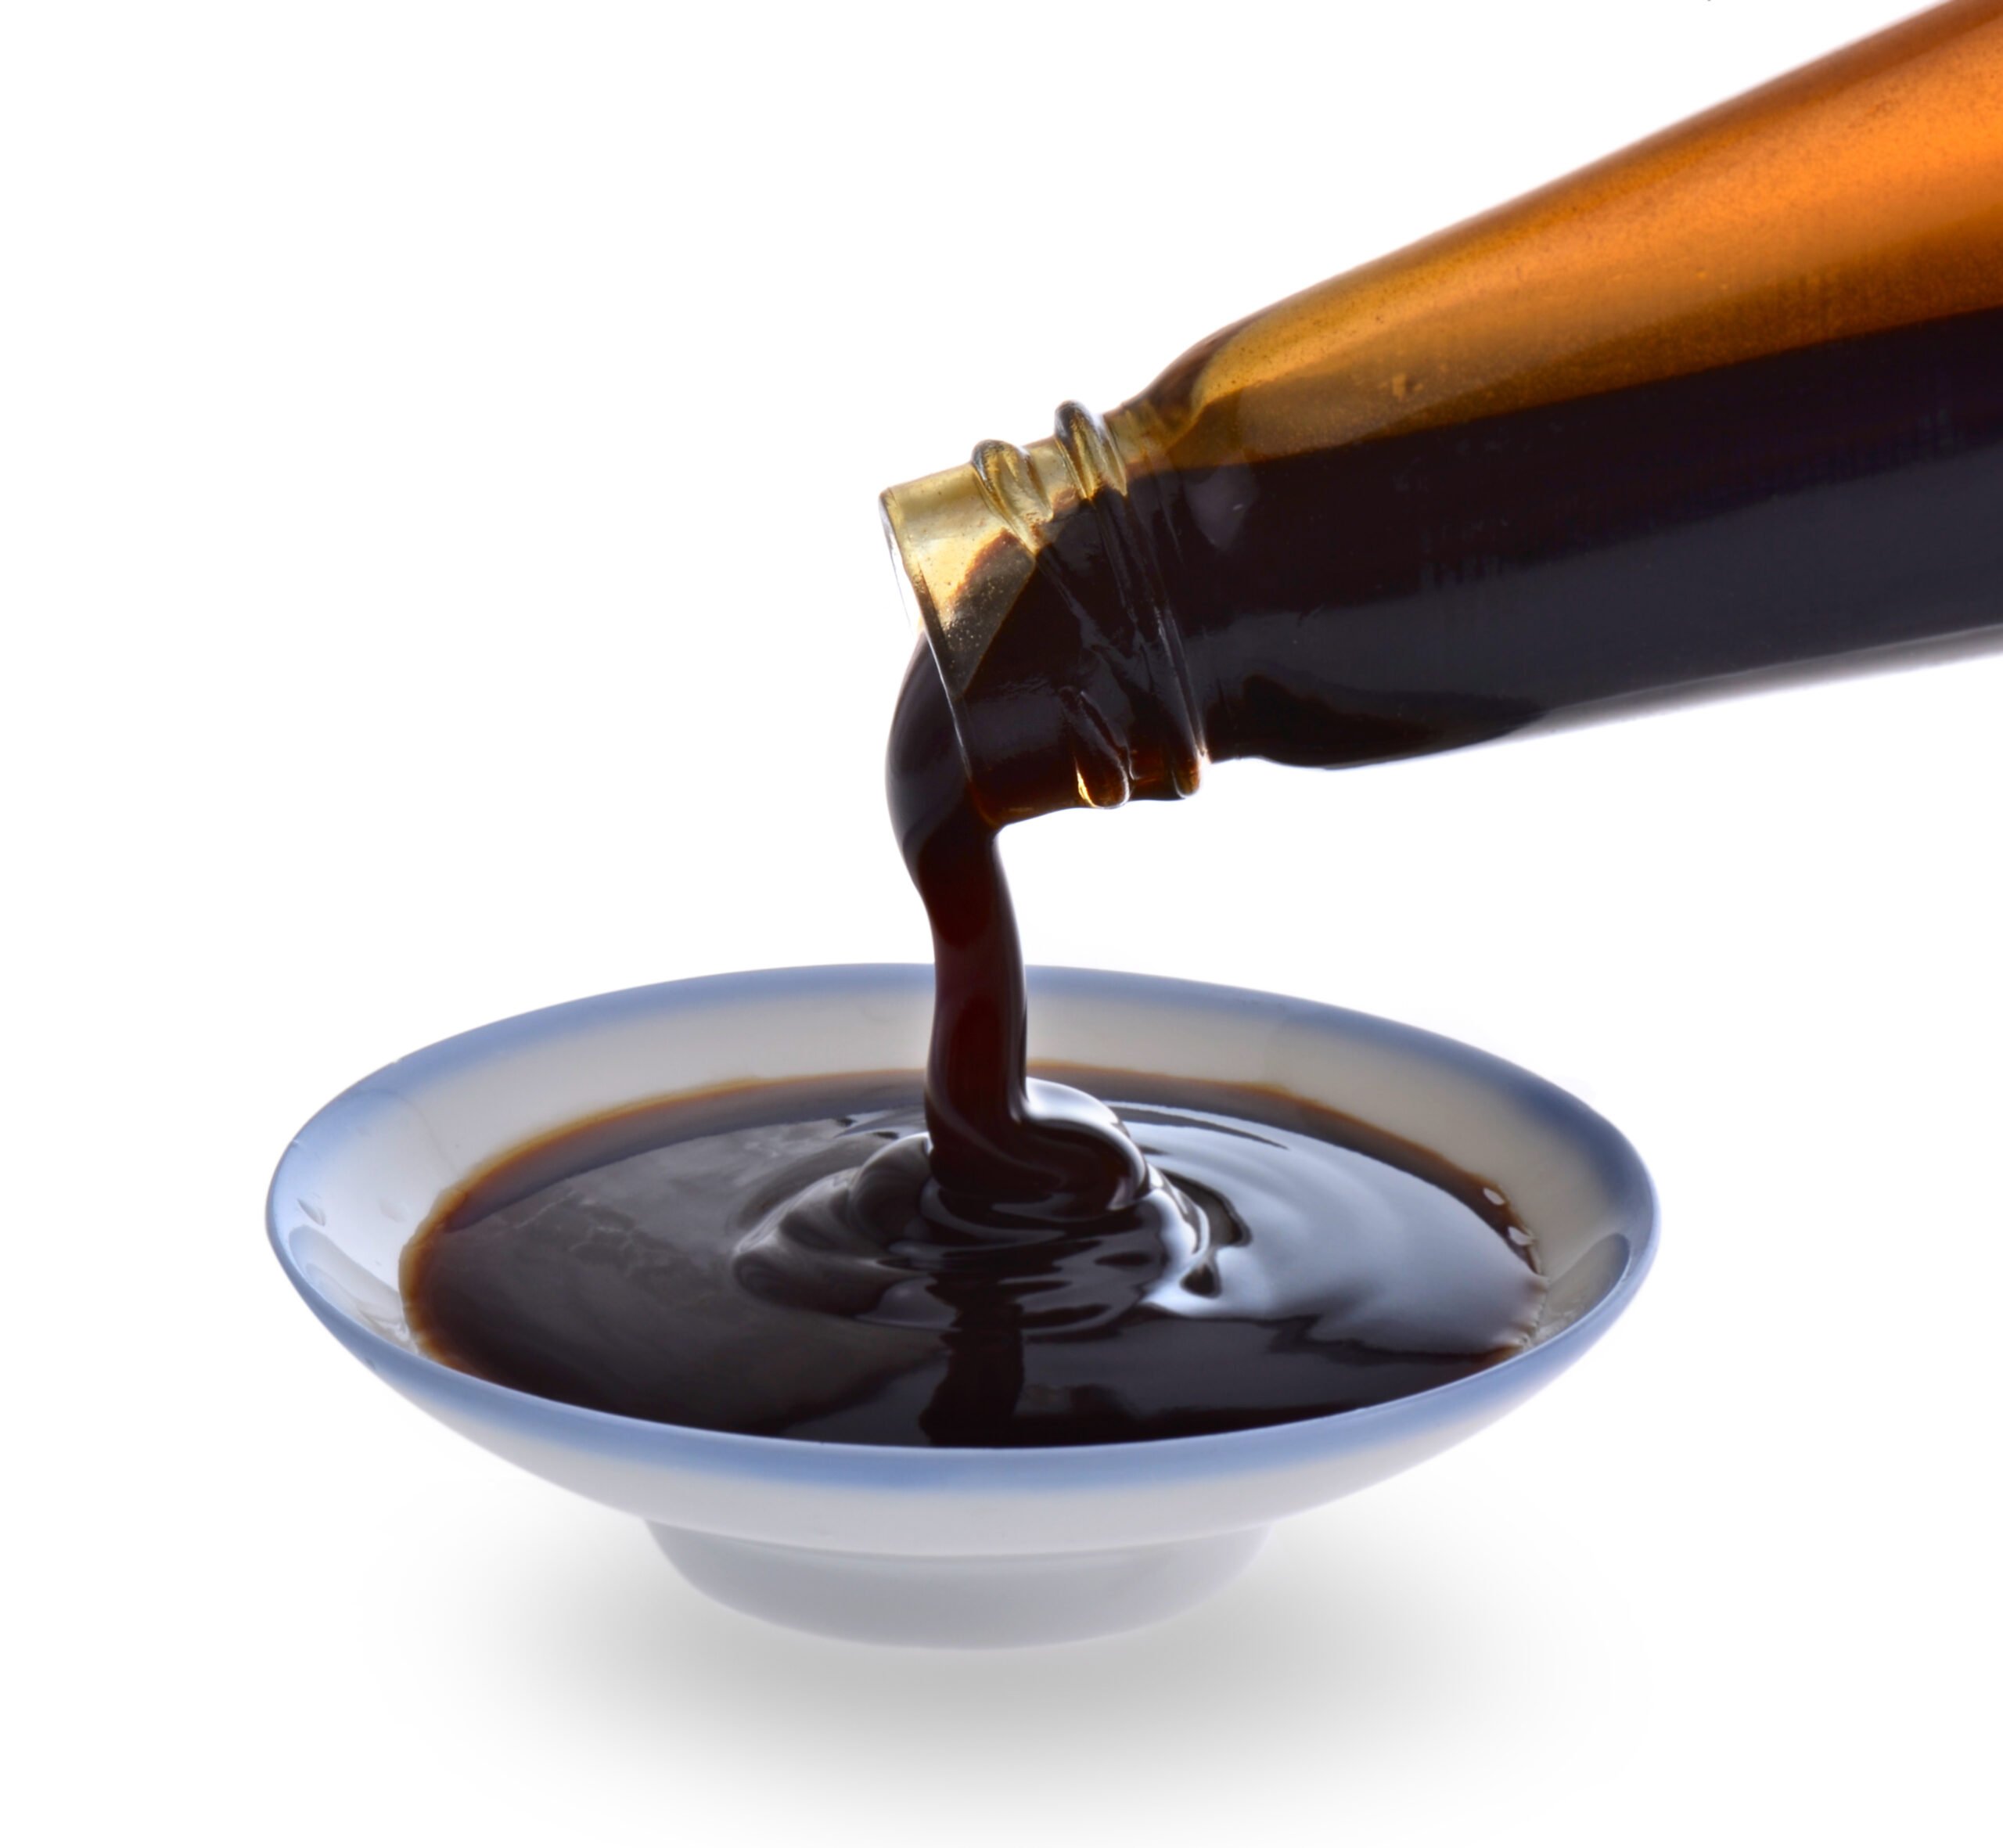 Oyster Sauce: What it is and How to Use it